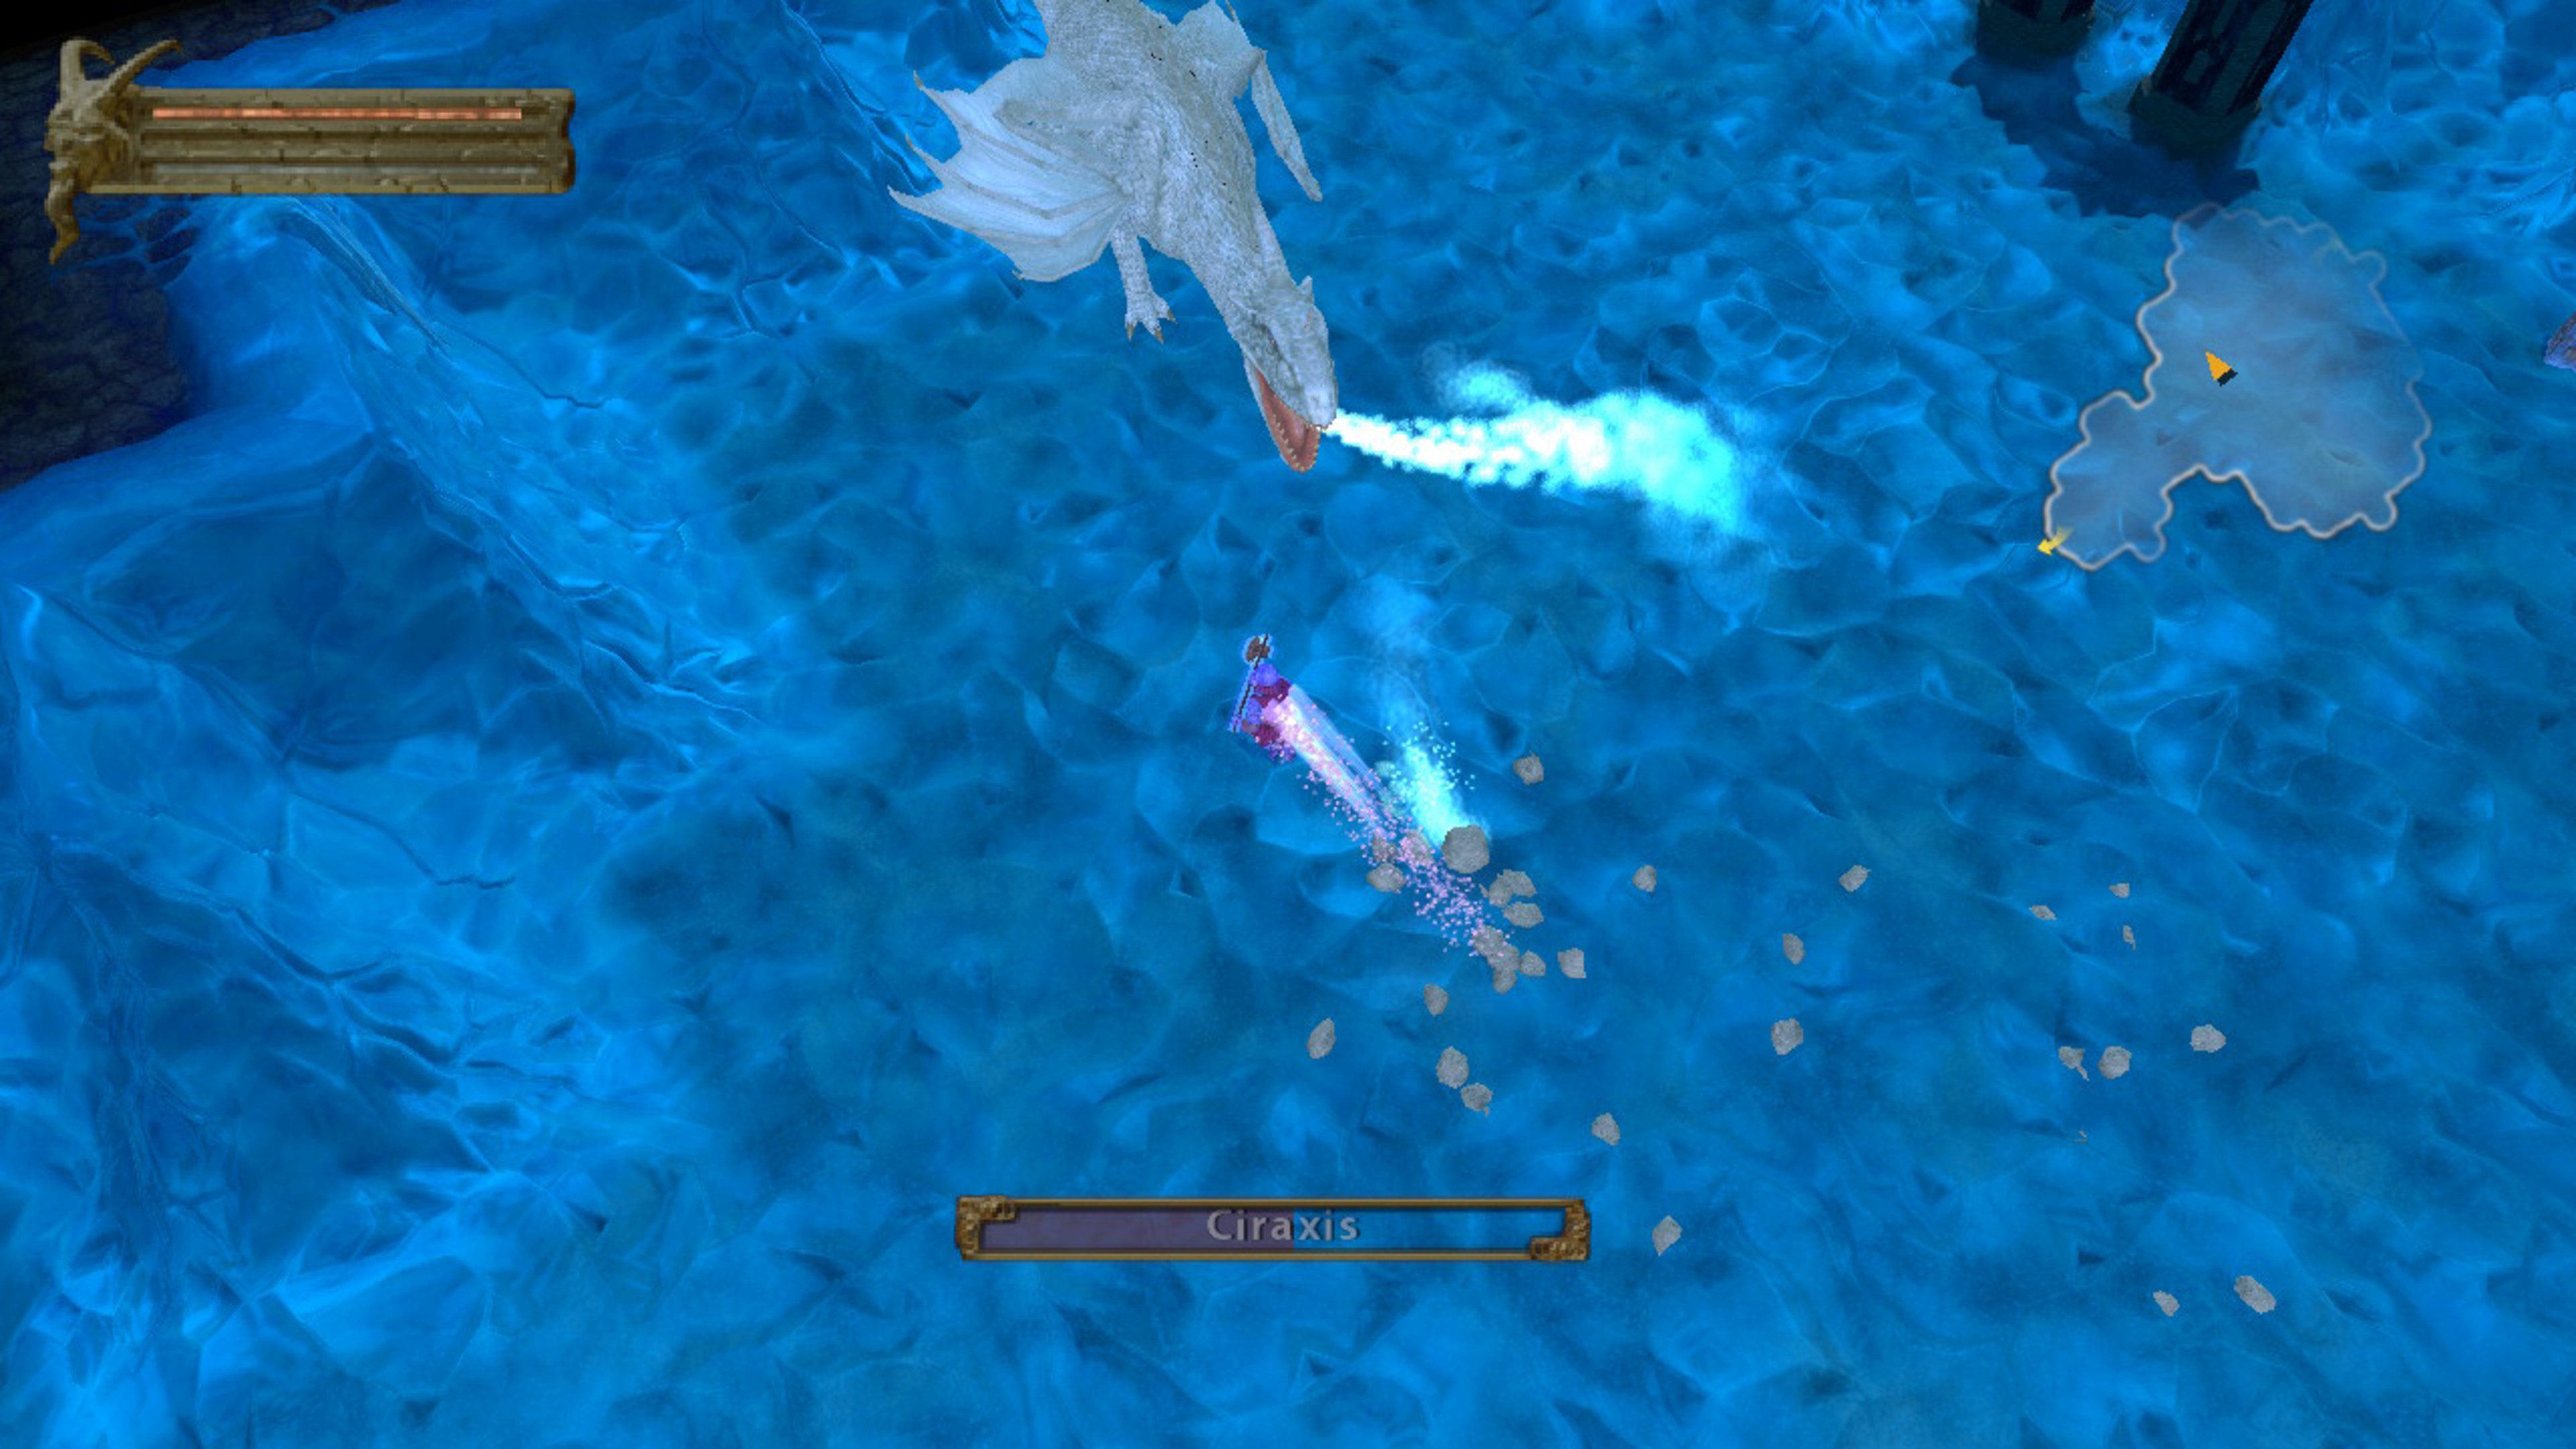 A player in Baldur’s Gate: Dark Alliance fighting a large frost-colored dragon